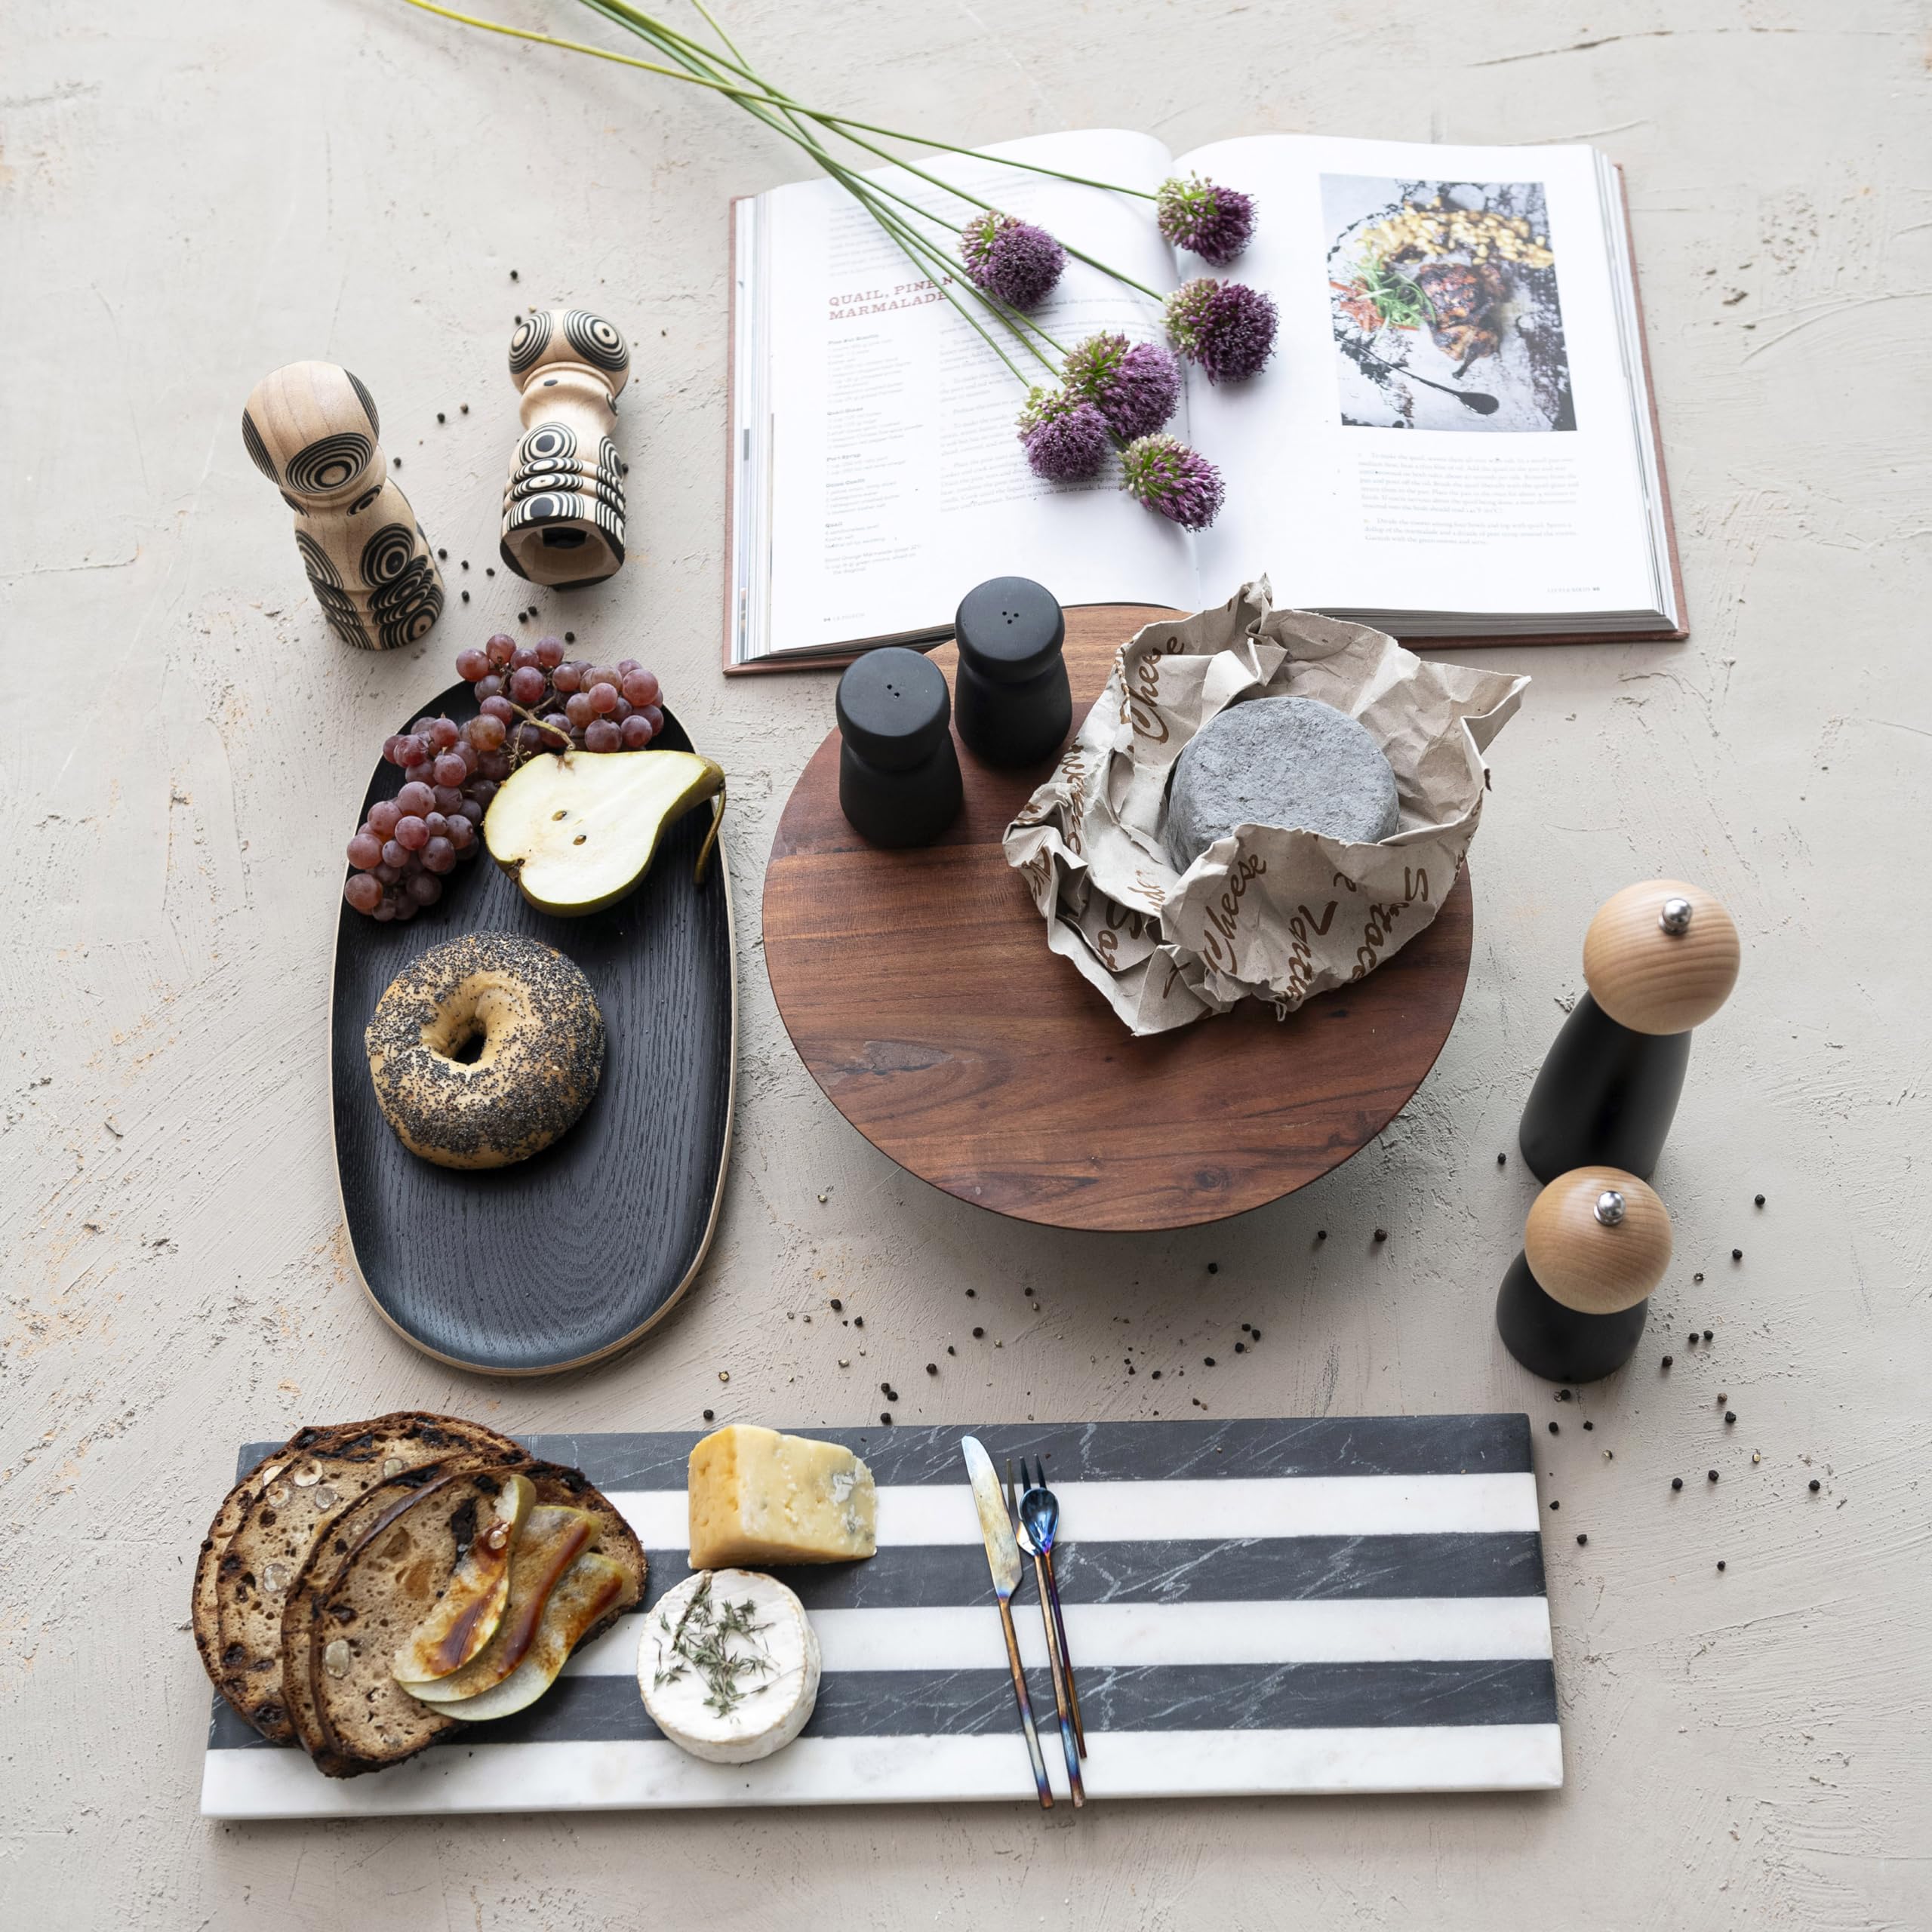 Bloomingville Marble Cheese and Serving Board with Stripes, Black and White